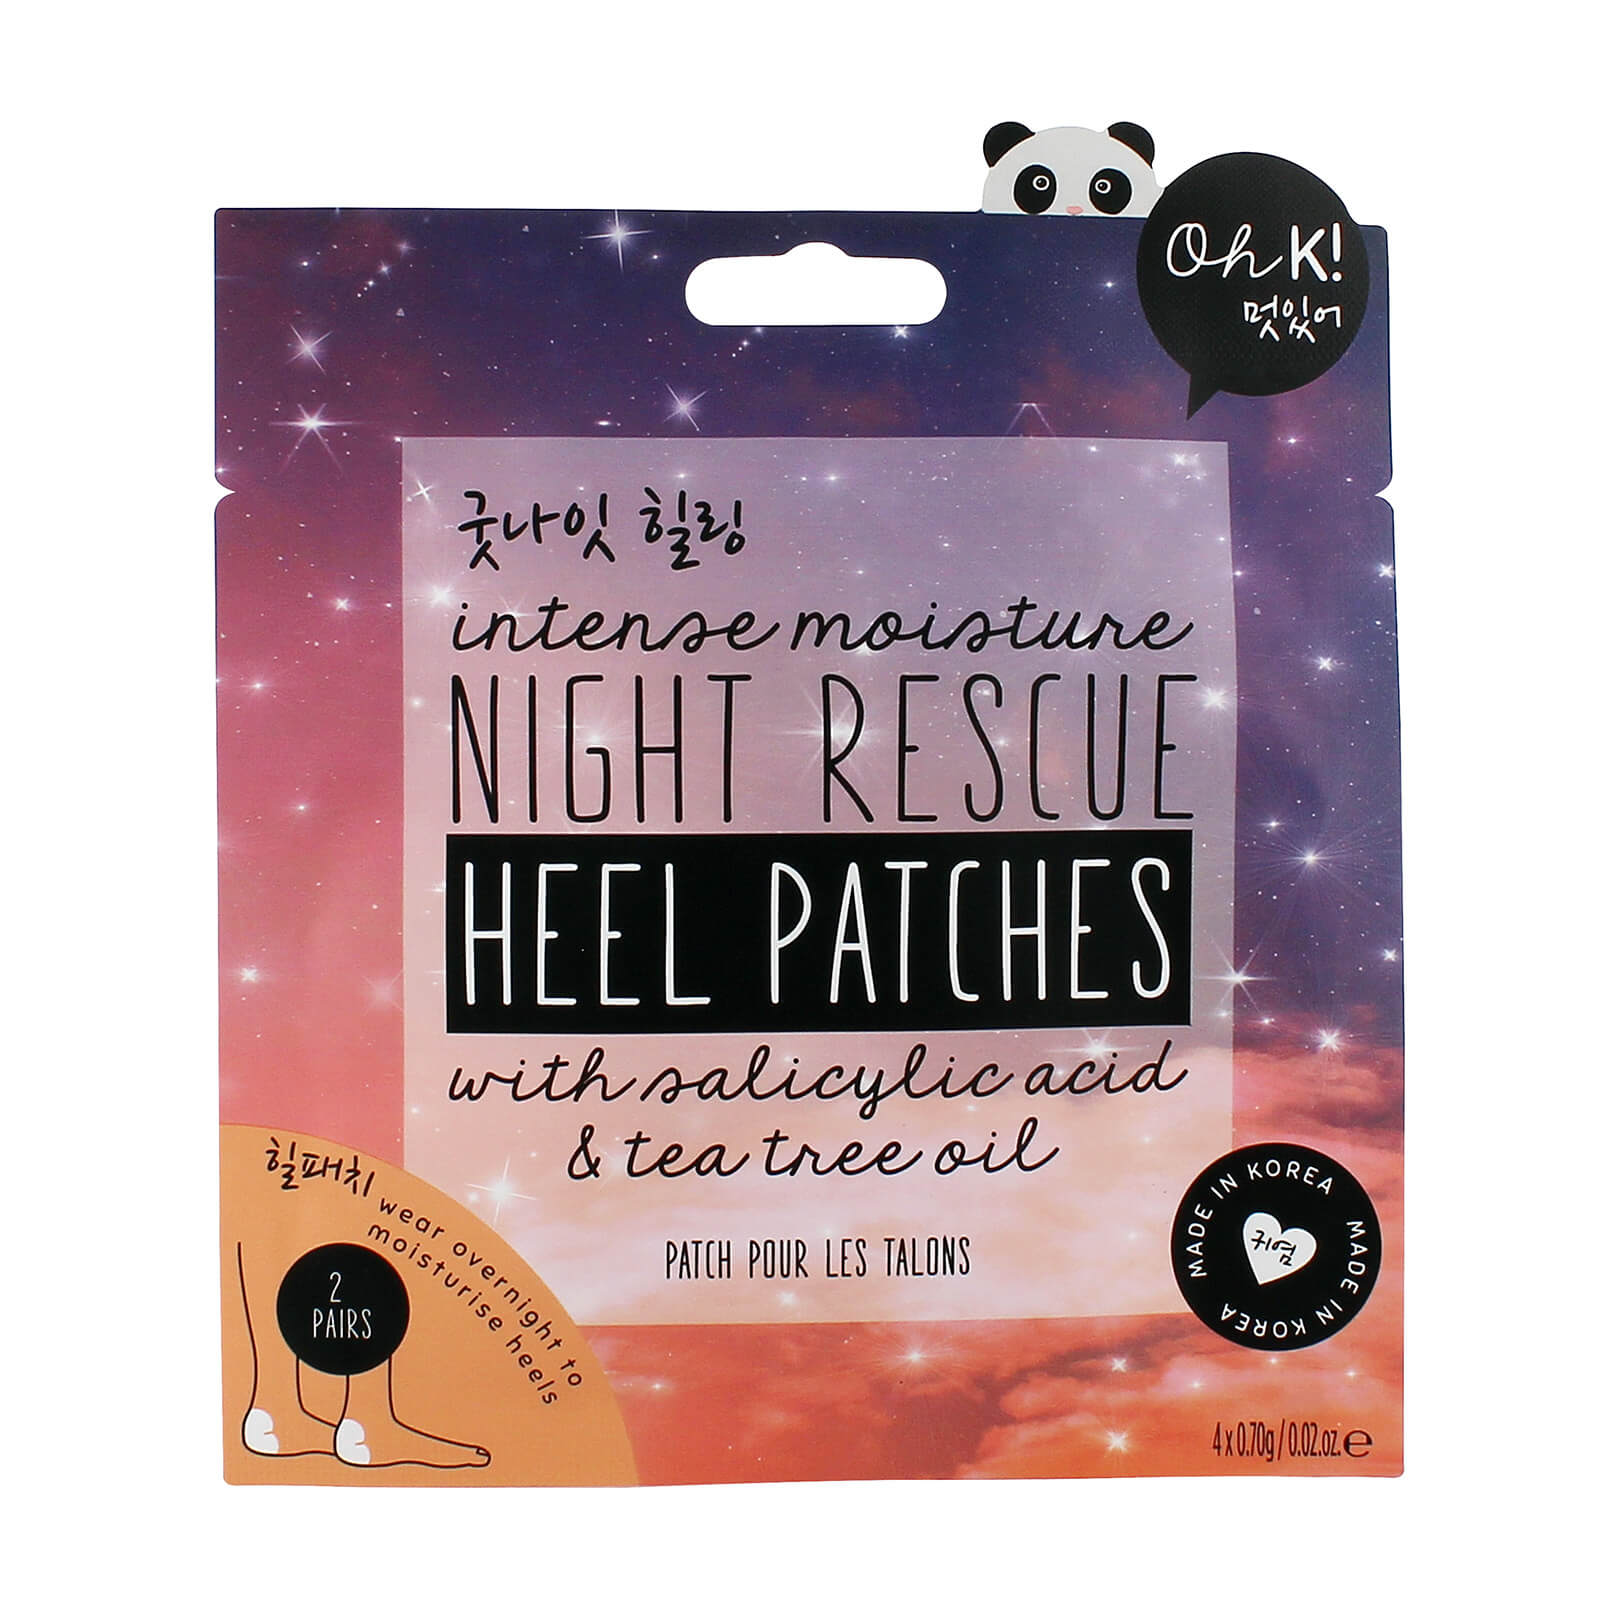 Oh K! Intense Moisture Night Rescue Heel Patches